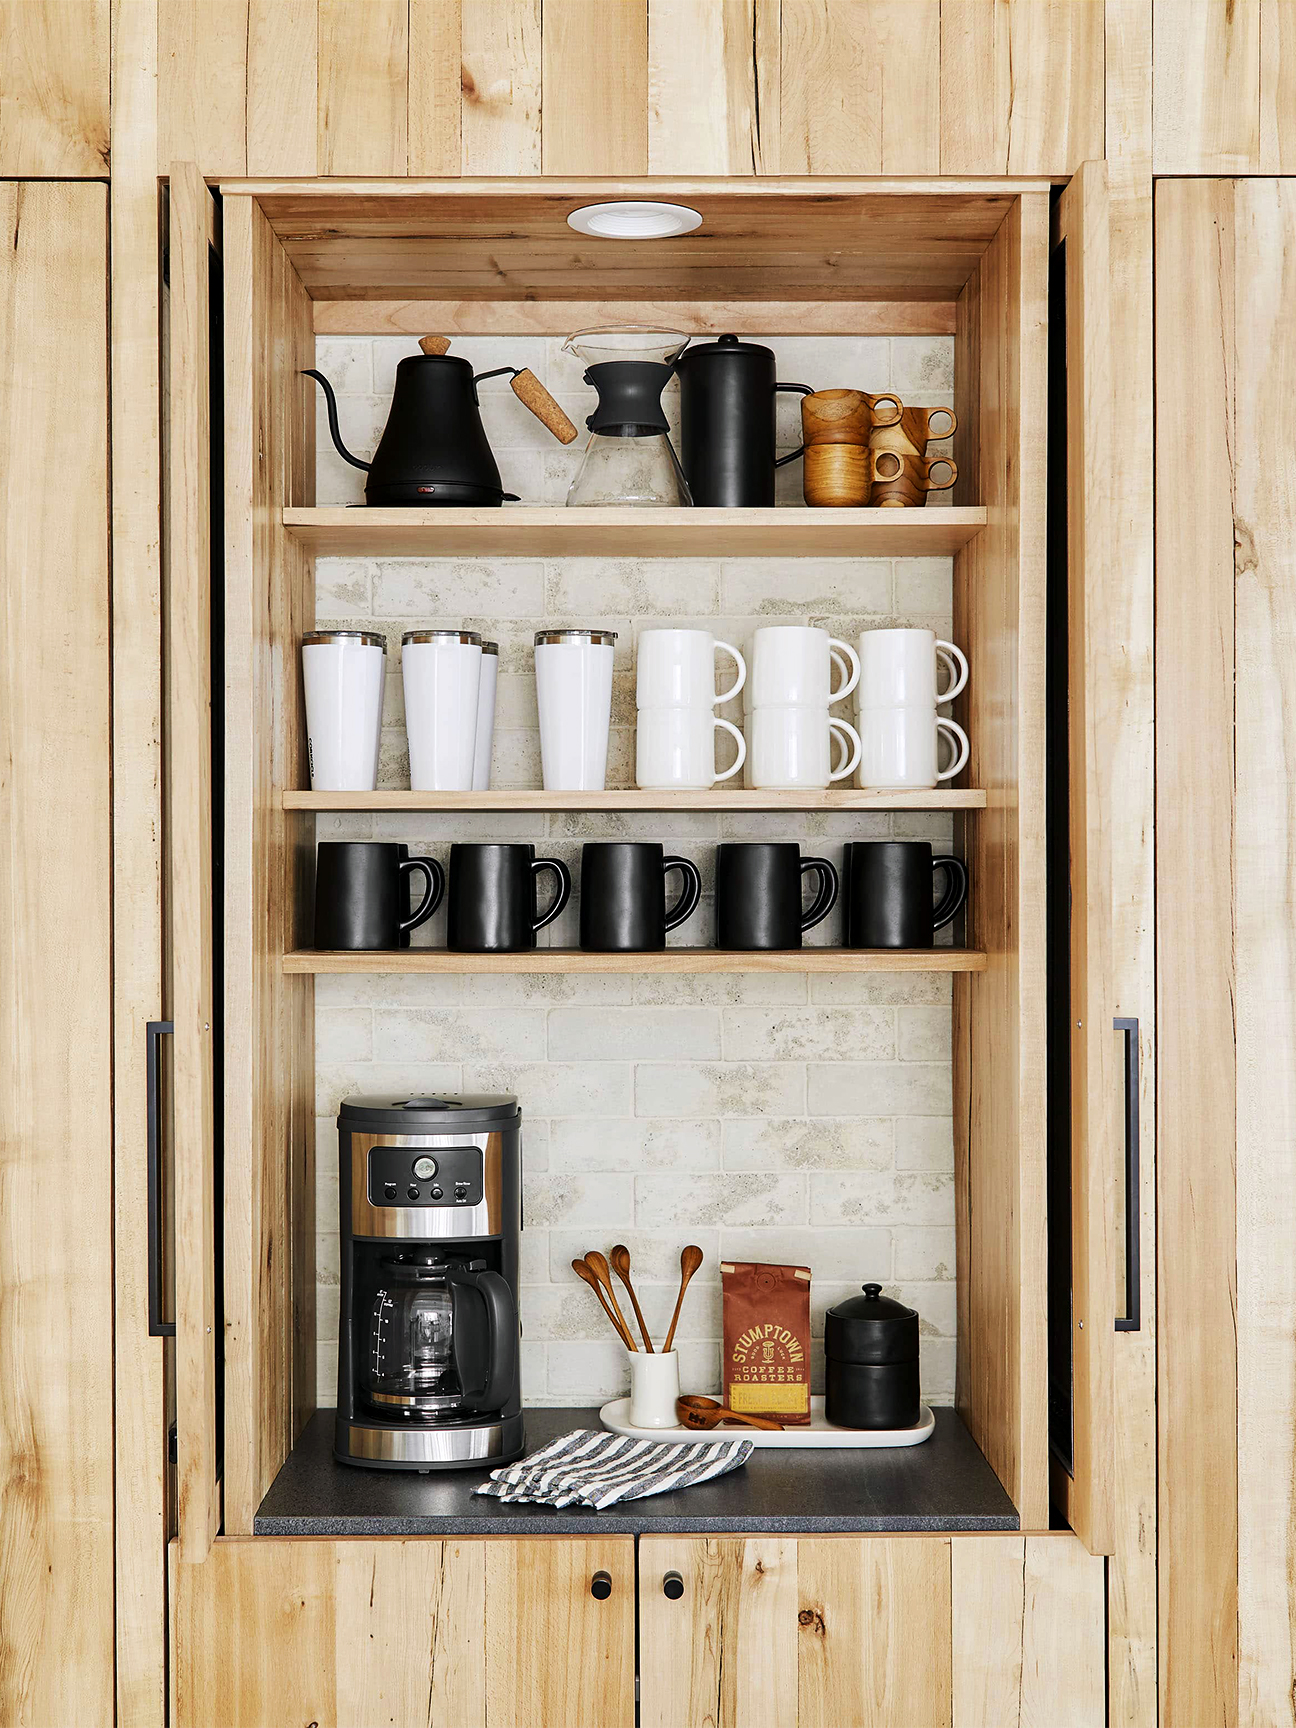 Coffee Station Accessories - The Design Souk